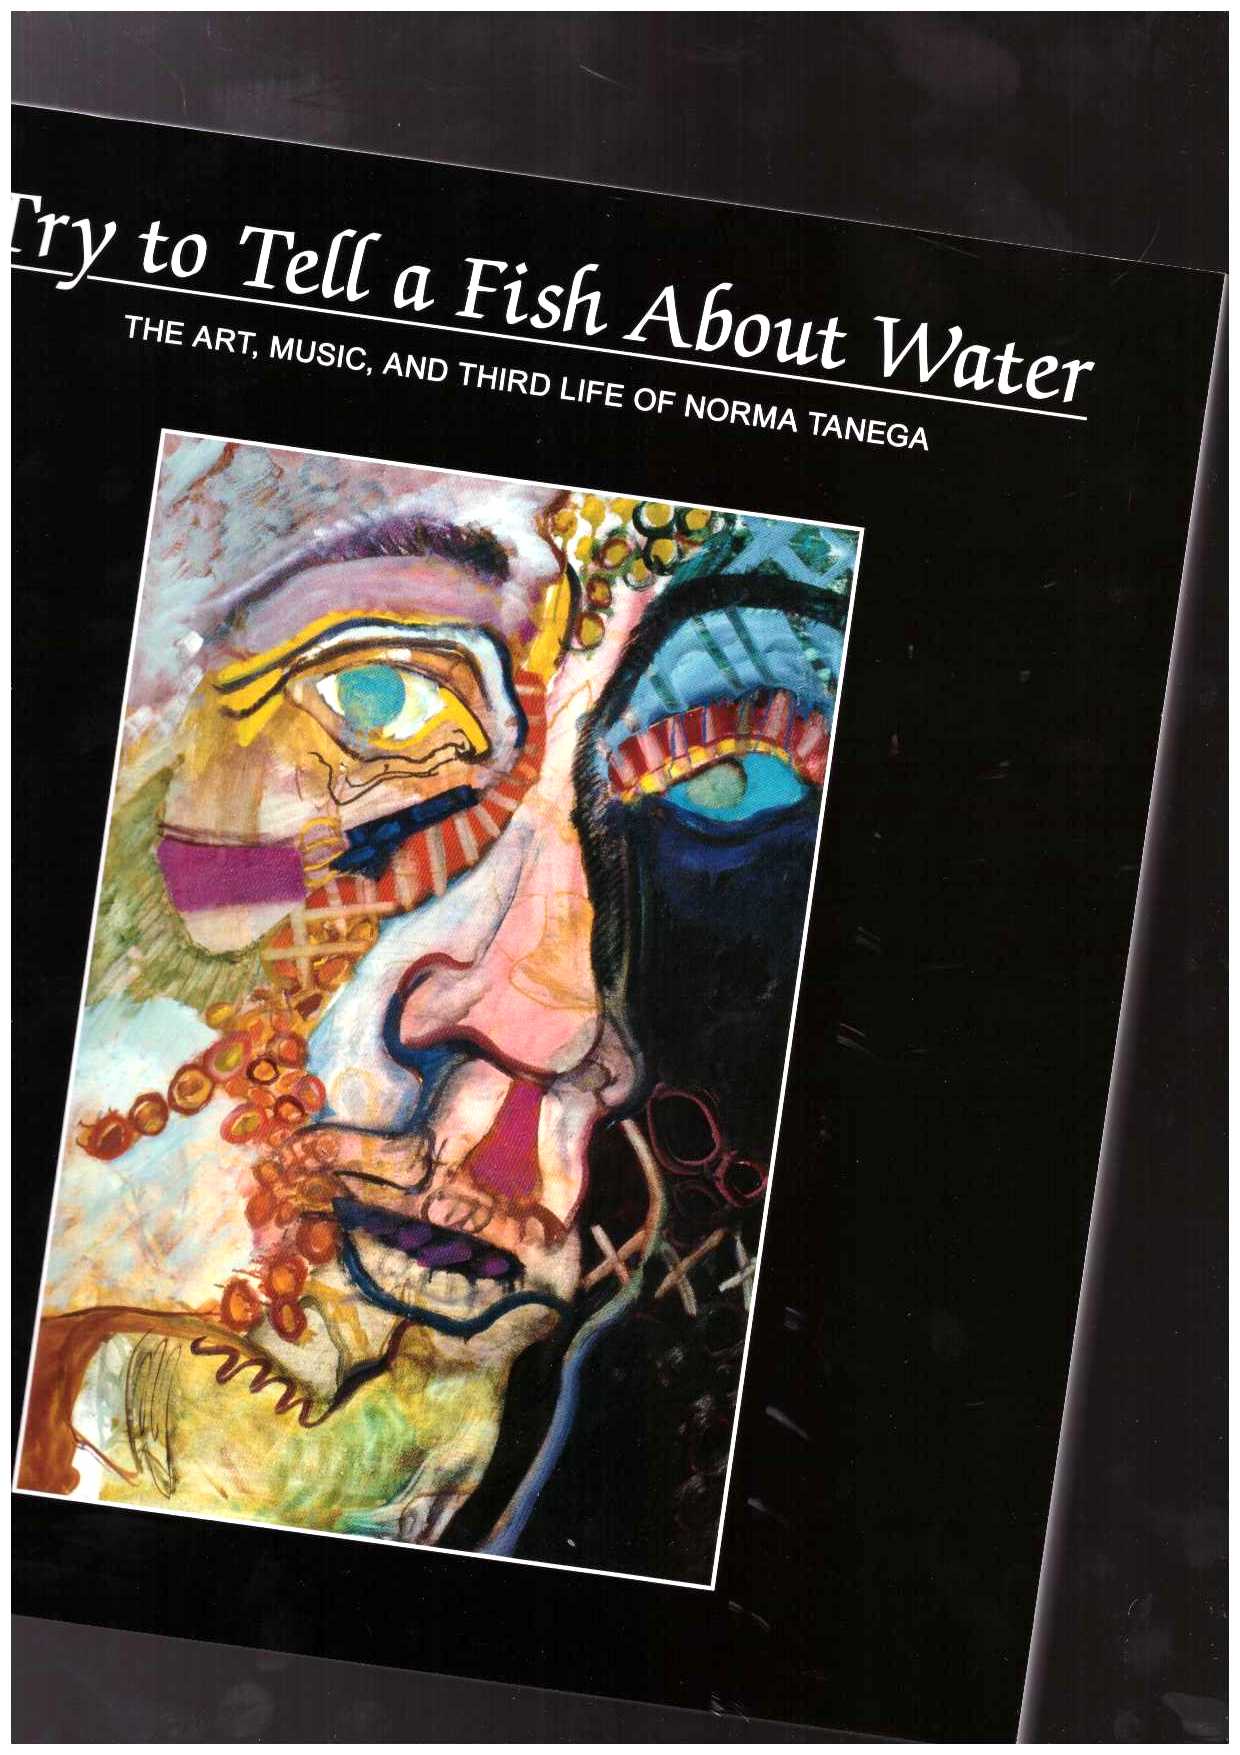 TANEGA, Norma; IOSIFESCU, Mark (ed.) - Try to Tell a Fish About Water: The Art, Music, and Third Life of Norma Tanega